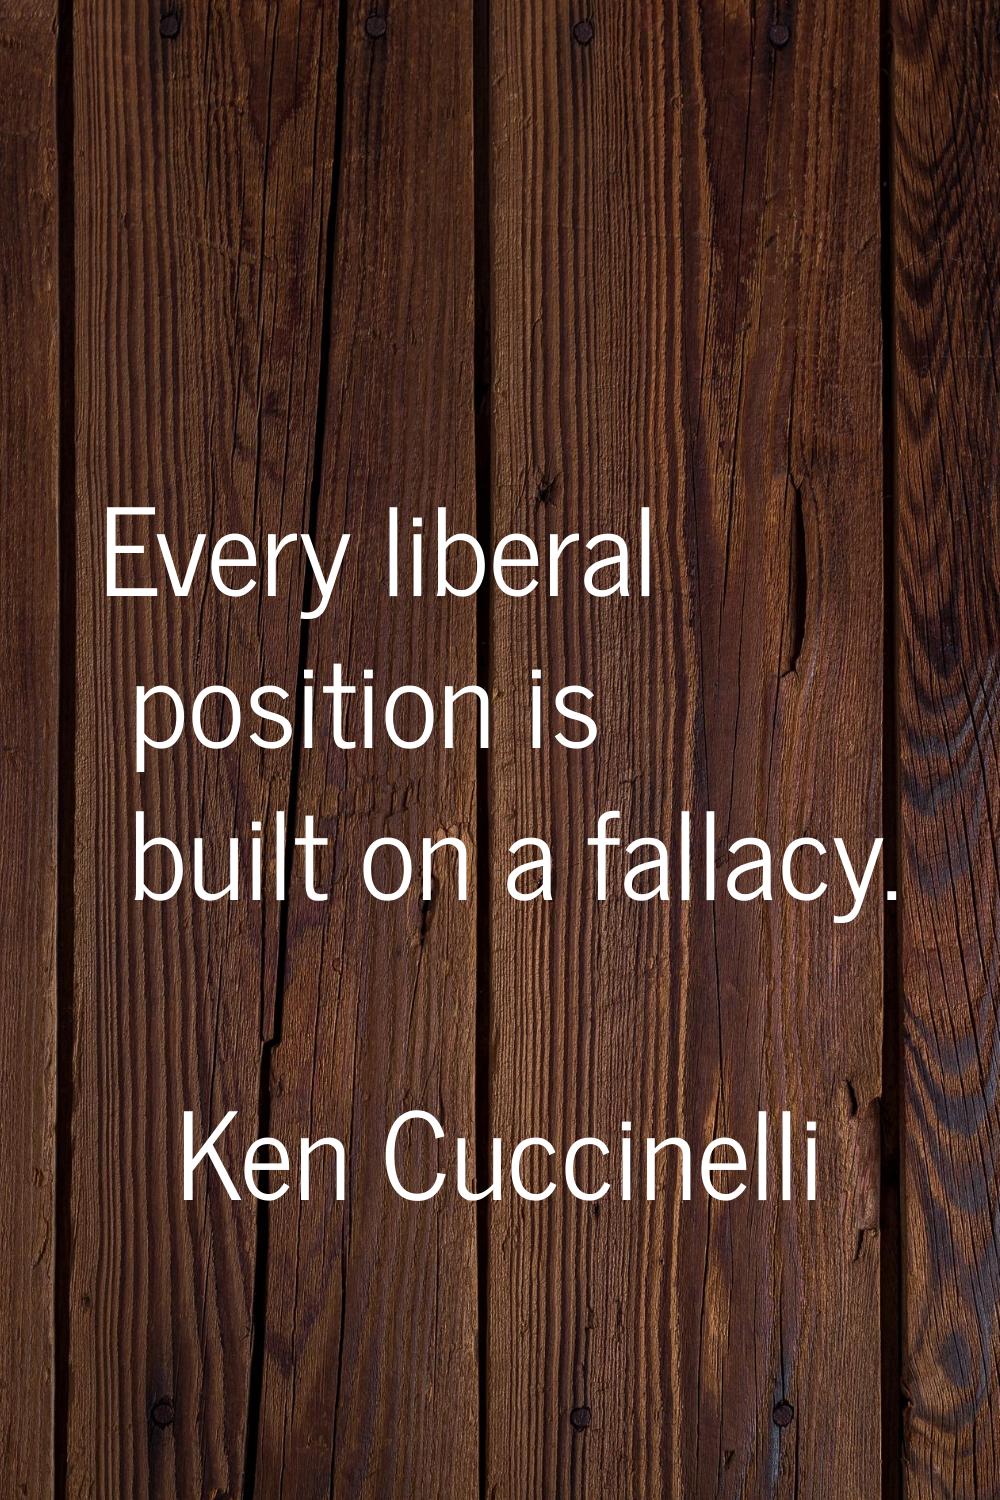 Every liberal position is built on a fallacy.